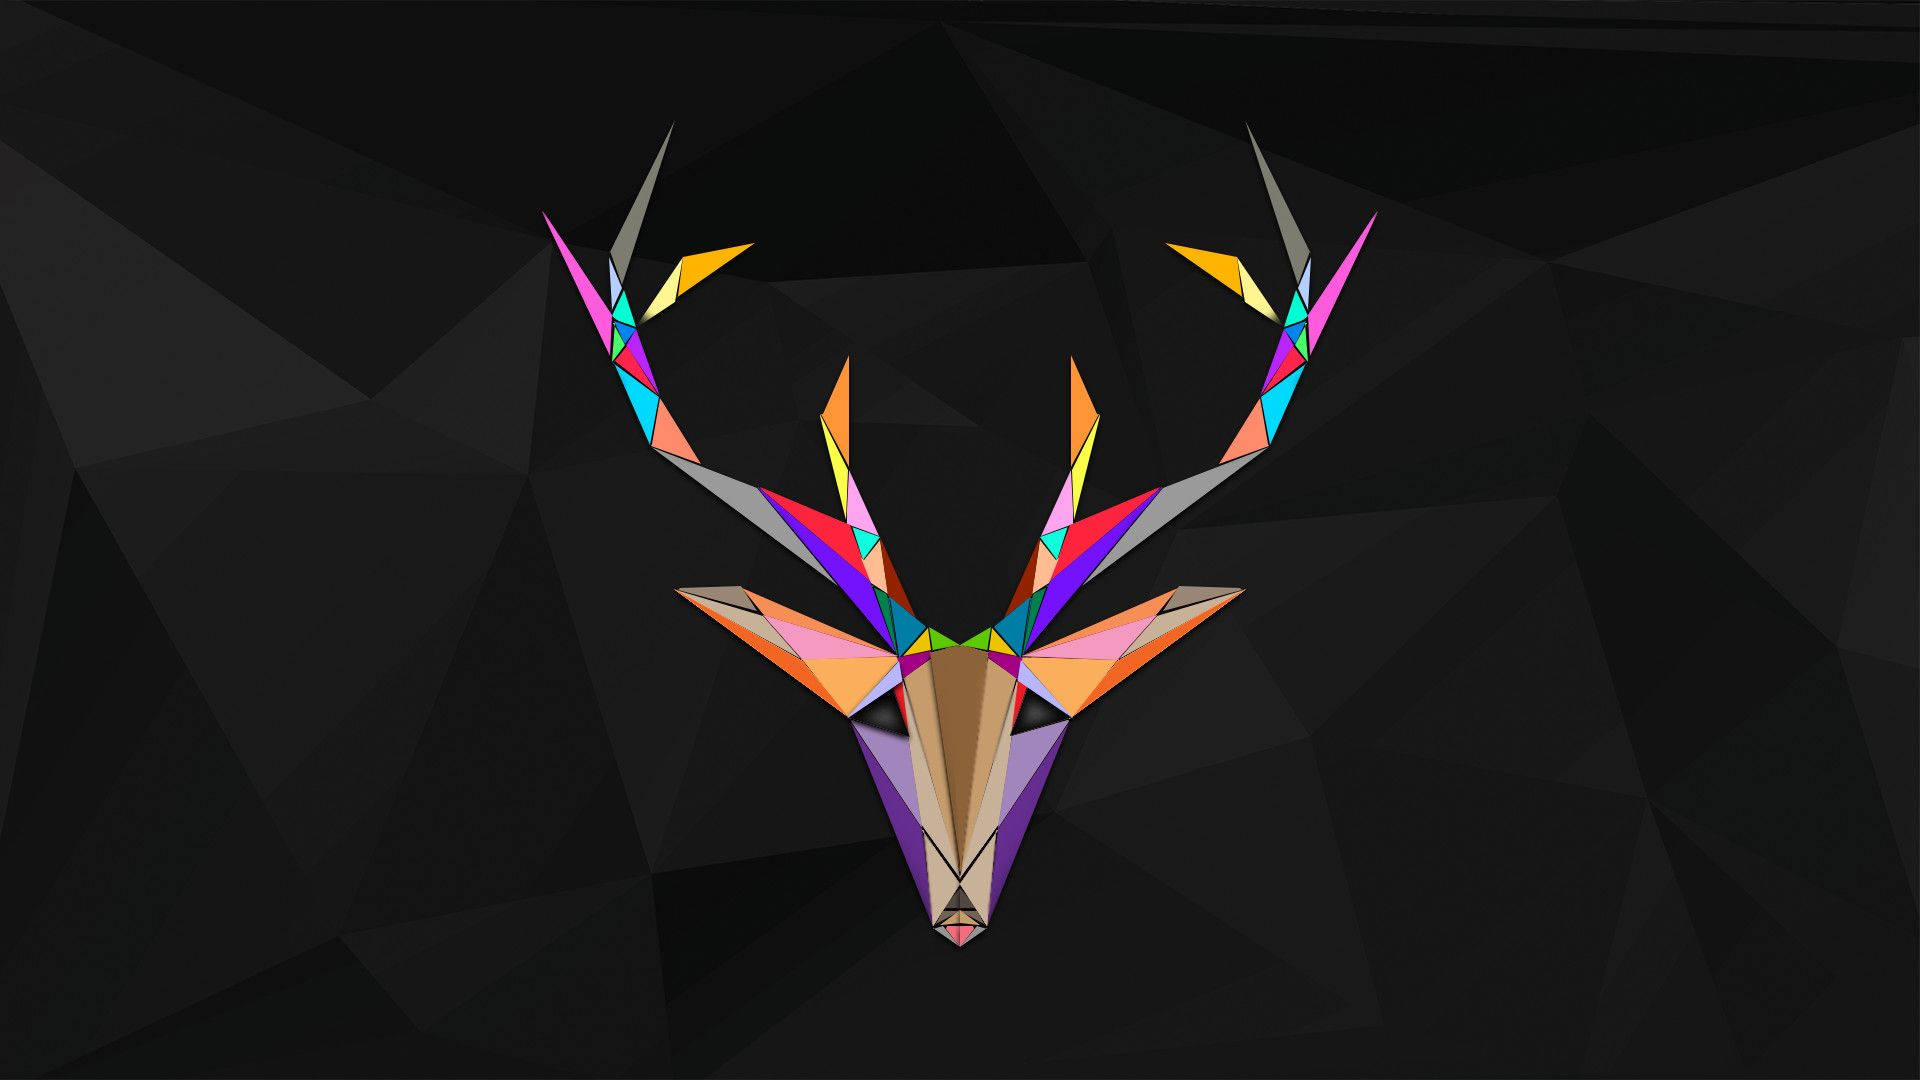 Feeling Festive? Replace Your Desktop Background With This Polygonal Reindeer Wallpaper